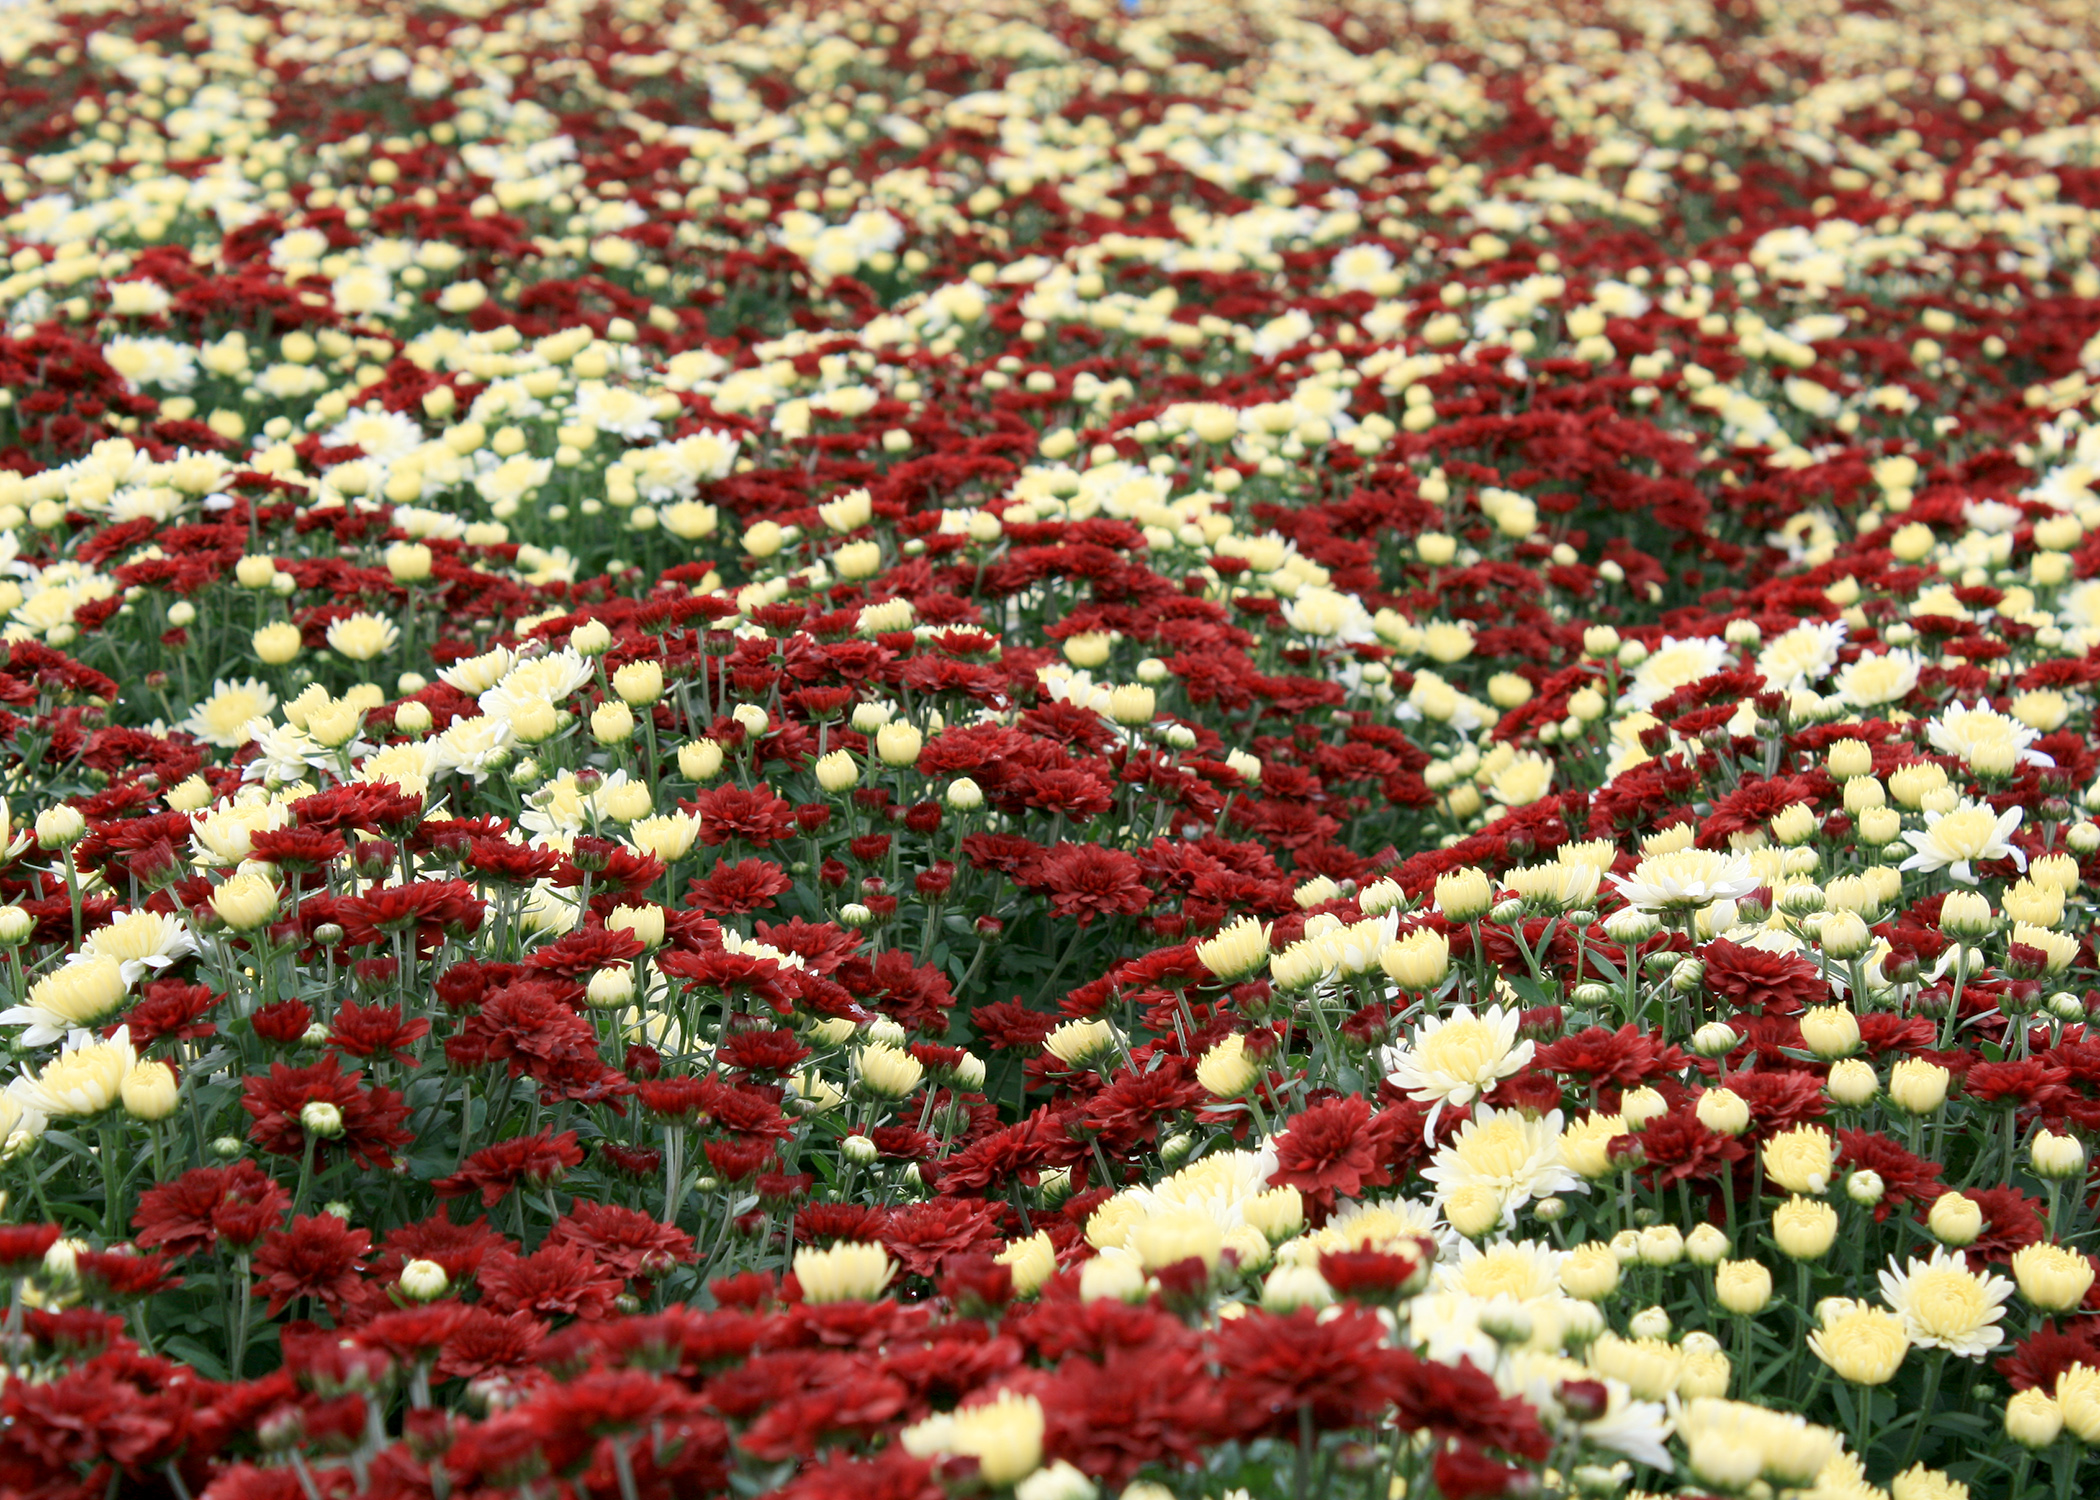 Fall mums in full flower have an instant impact for any autumn event. Their many warm colors can complement almost any home color scheme. (Photo by MSU Extension/Gary Bachman)